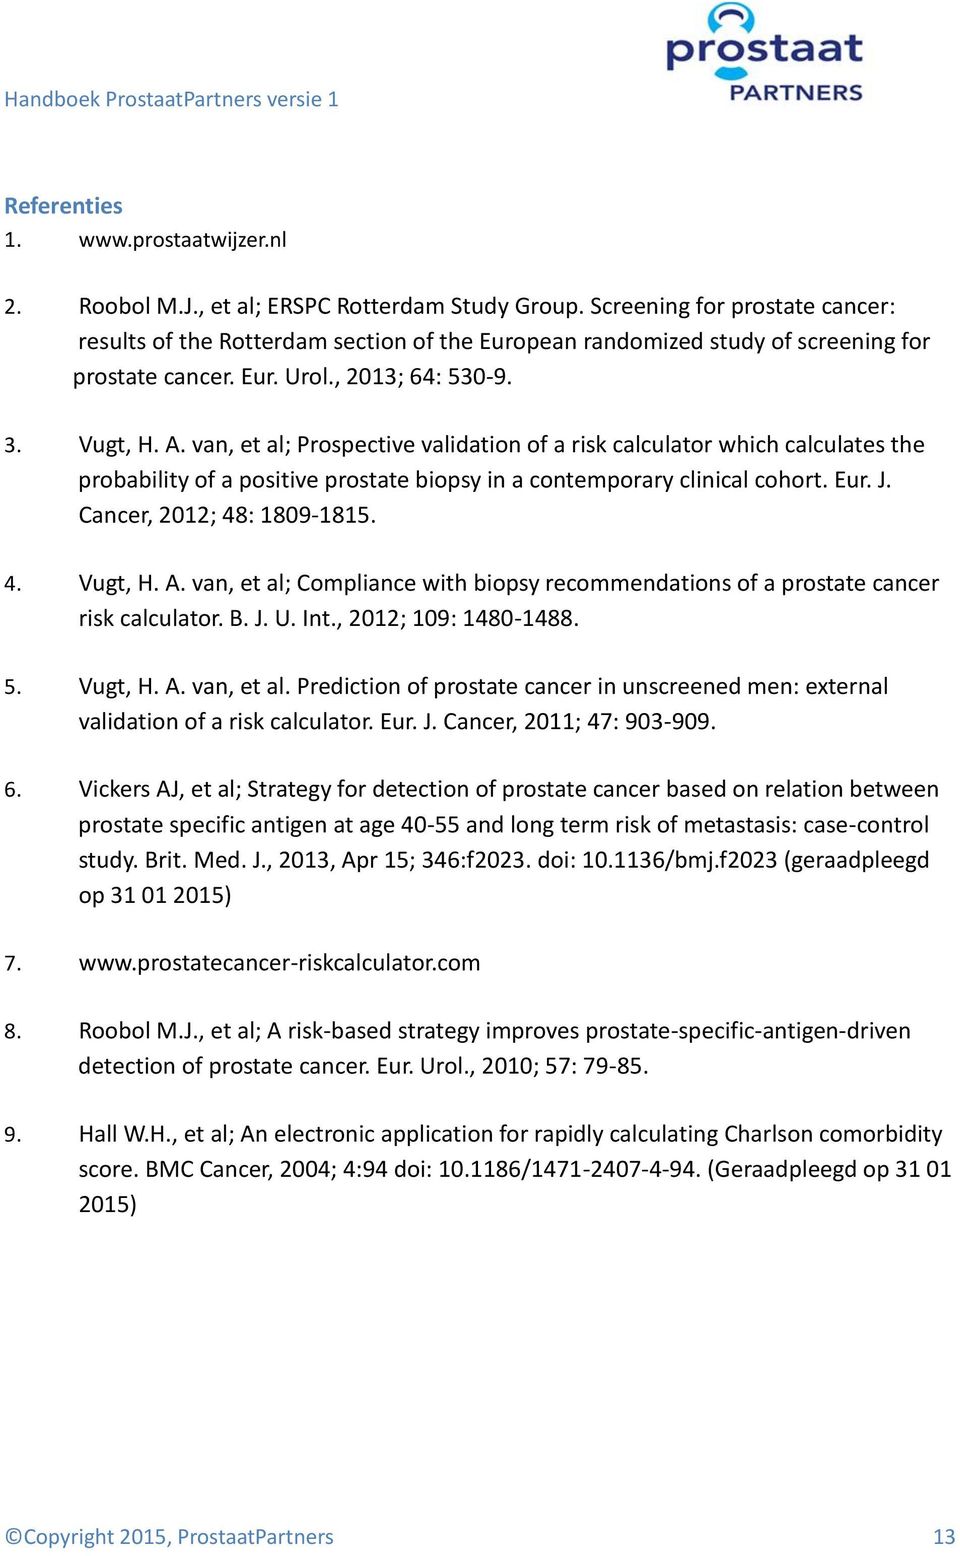 van, et al; Prospective validation of a risk calculator which calculates the probability of a positive prostate biopsy in a contemporary clinical cohort. Eur. J. Cancer, 2012; 48: 1809-1815. 4. Vugt, H.